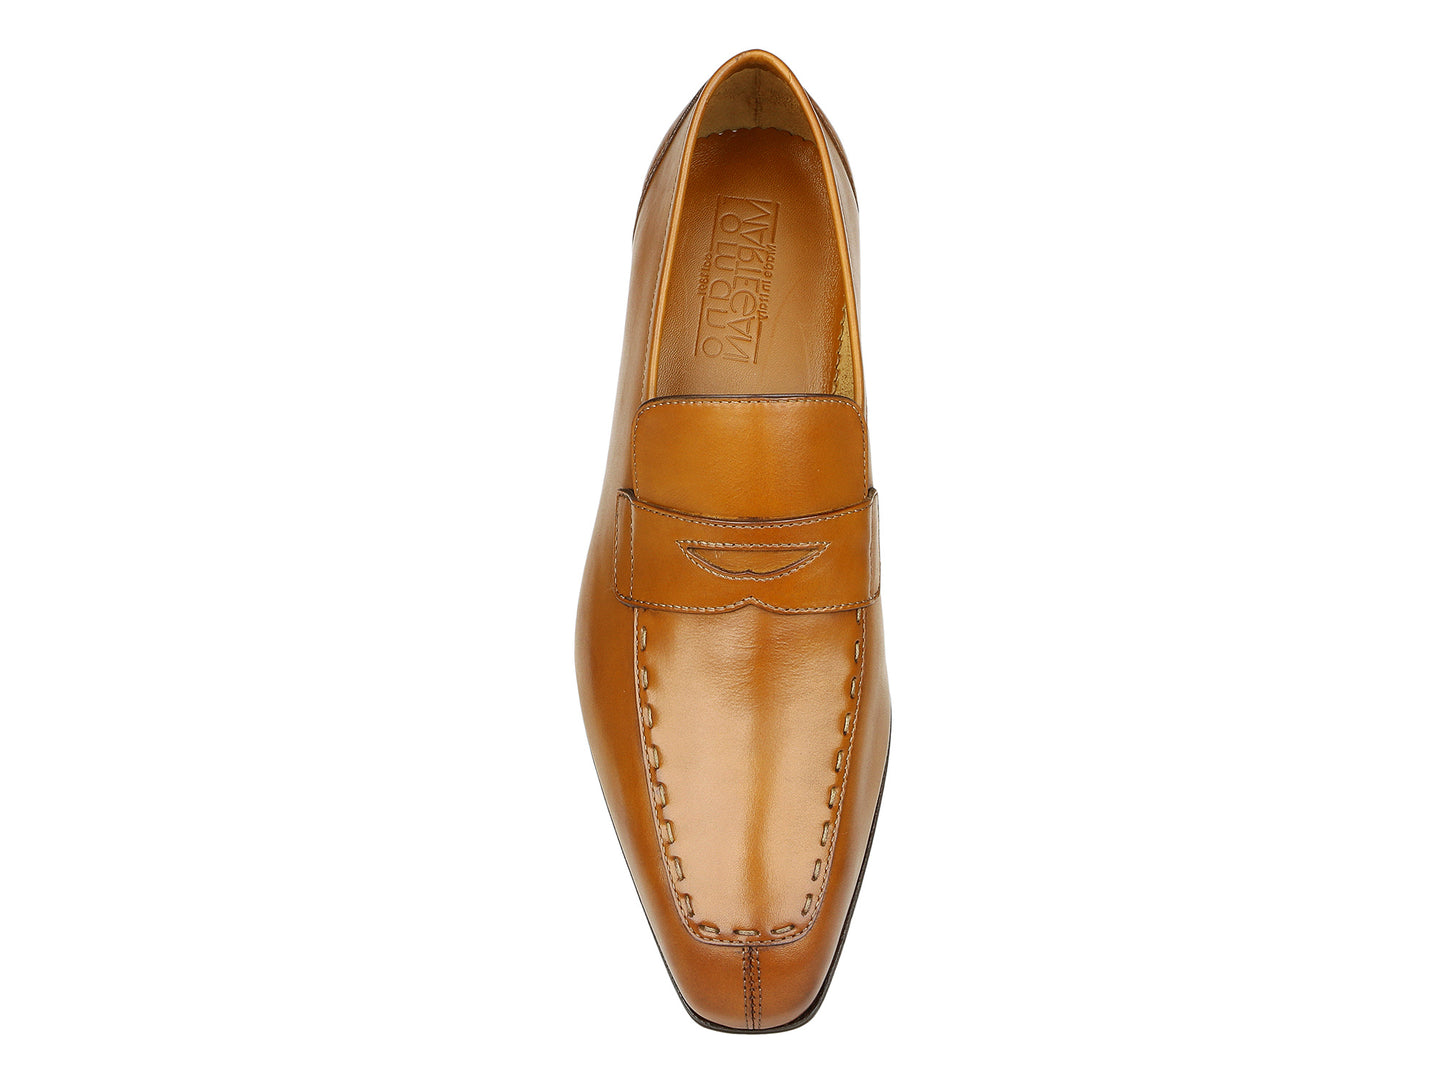 Penny Loafer with hand sewing details on plug